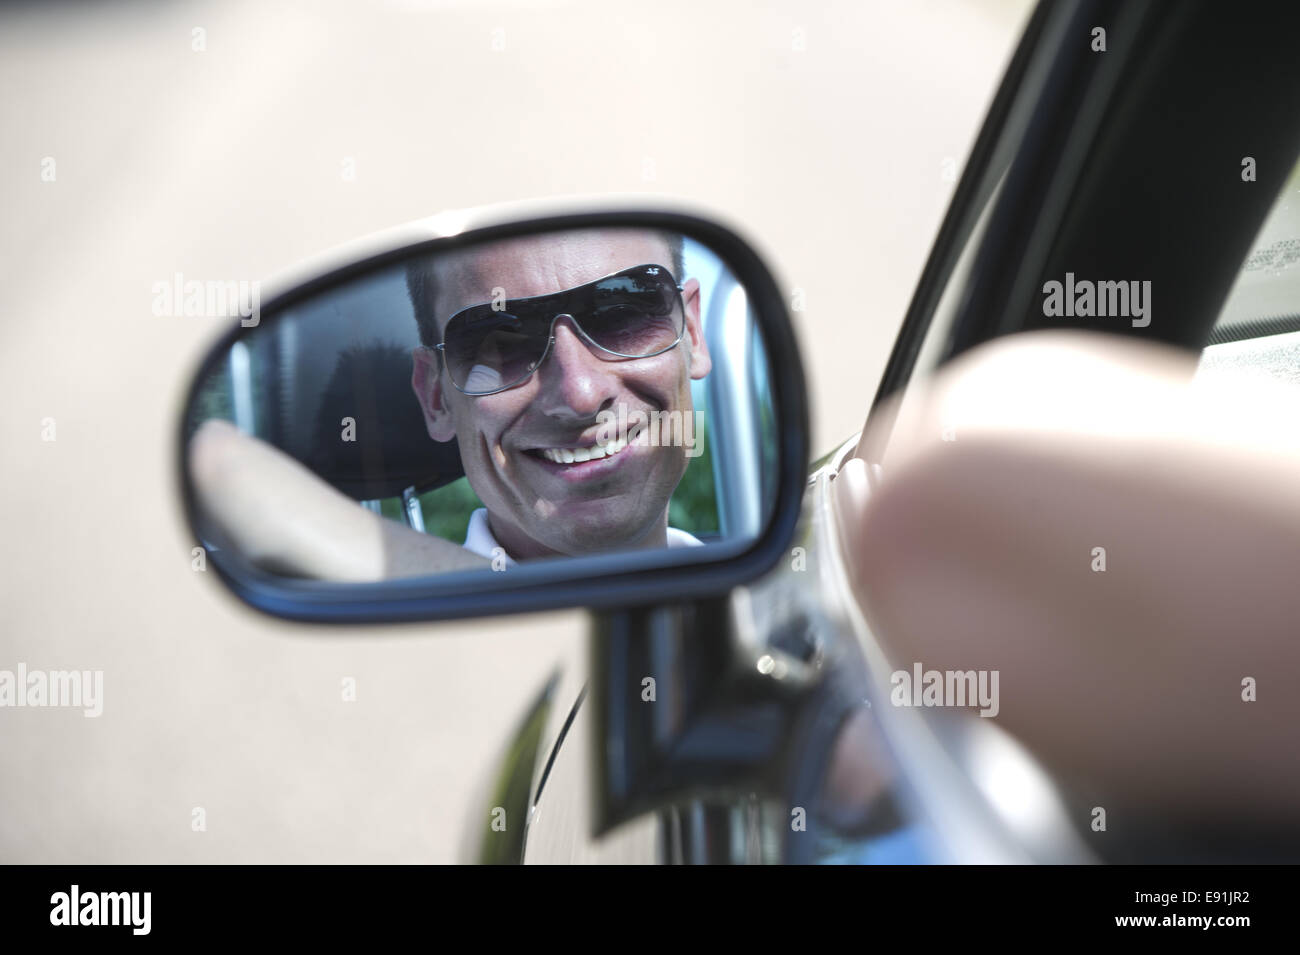 Cool guy in a car Stock Photo